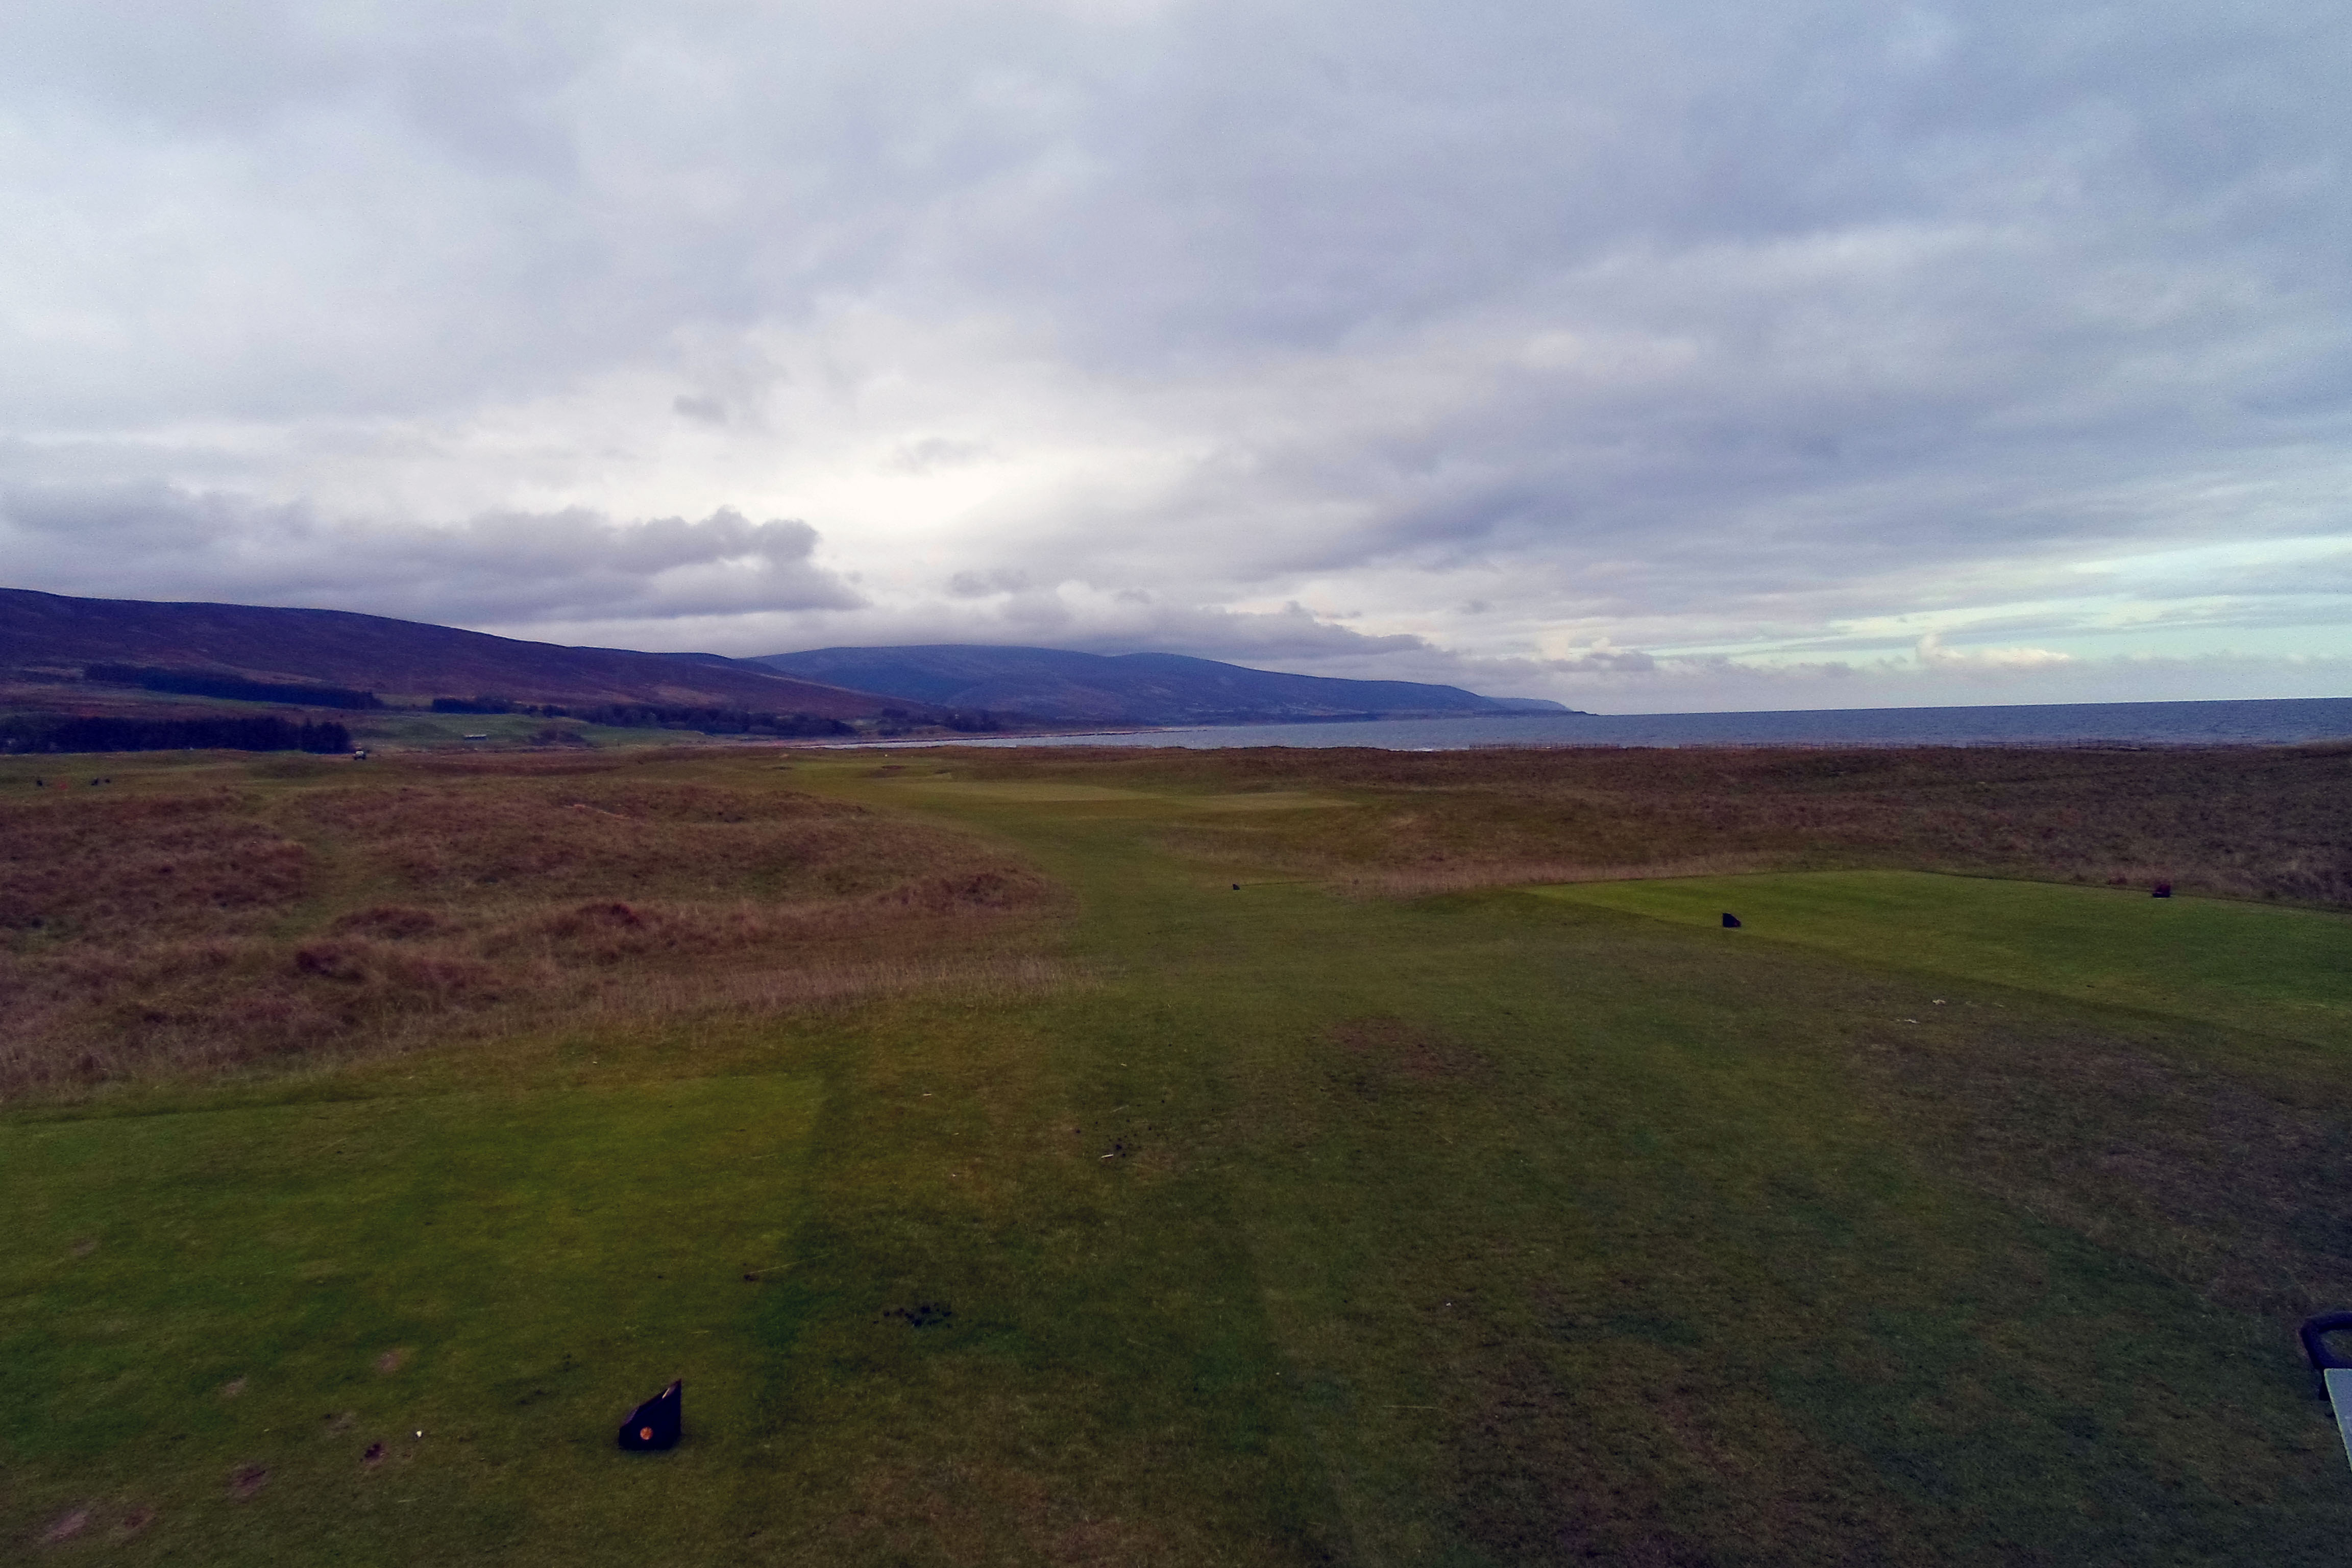 Brora: 'The finest traditional links golf course in the world'